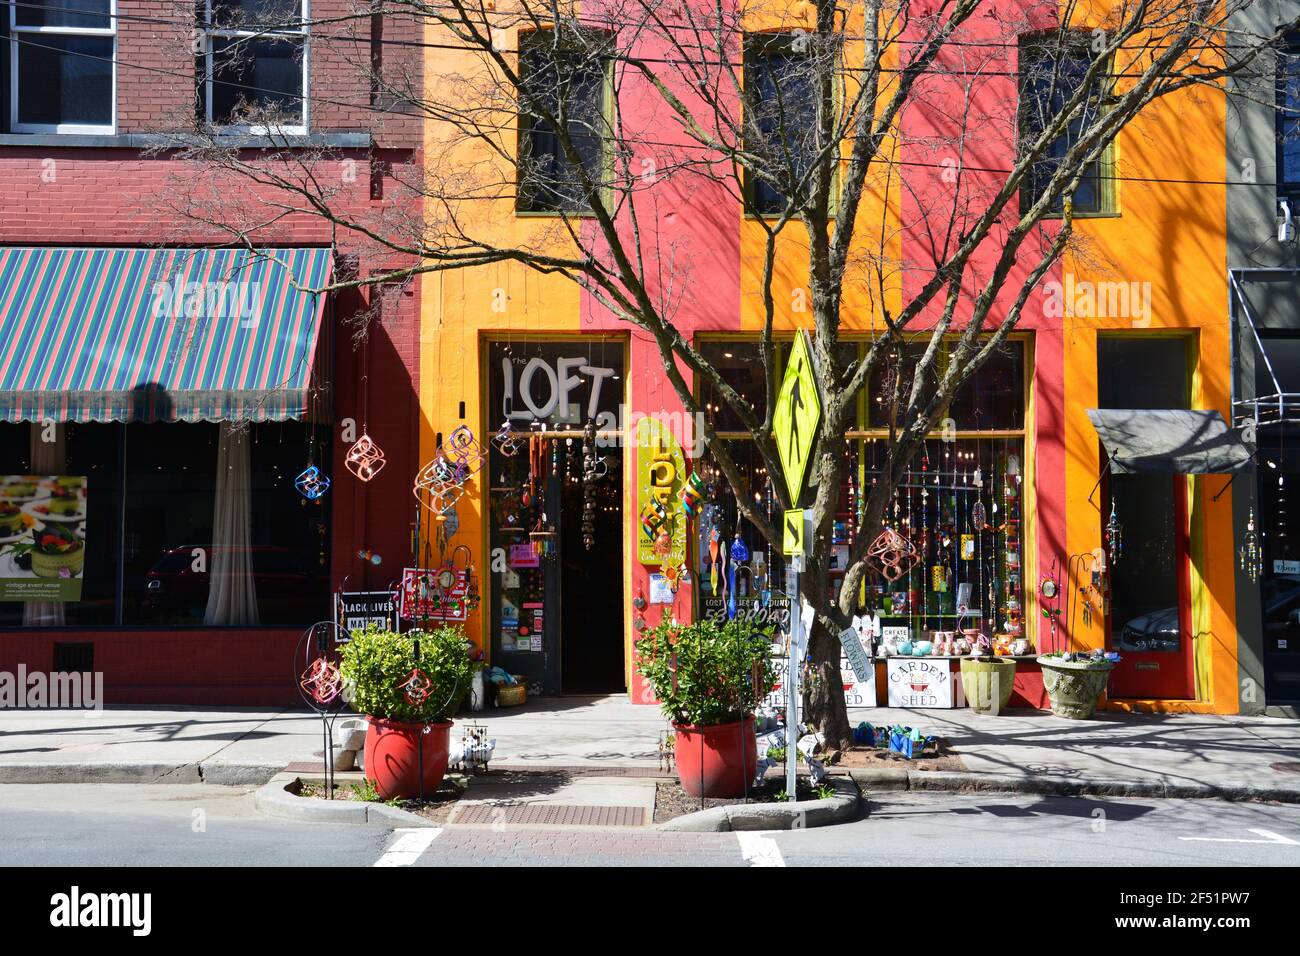 A colorful storefront on Broadway in the historic district of Asheville, North Carolina. Stock Photo